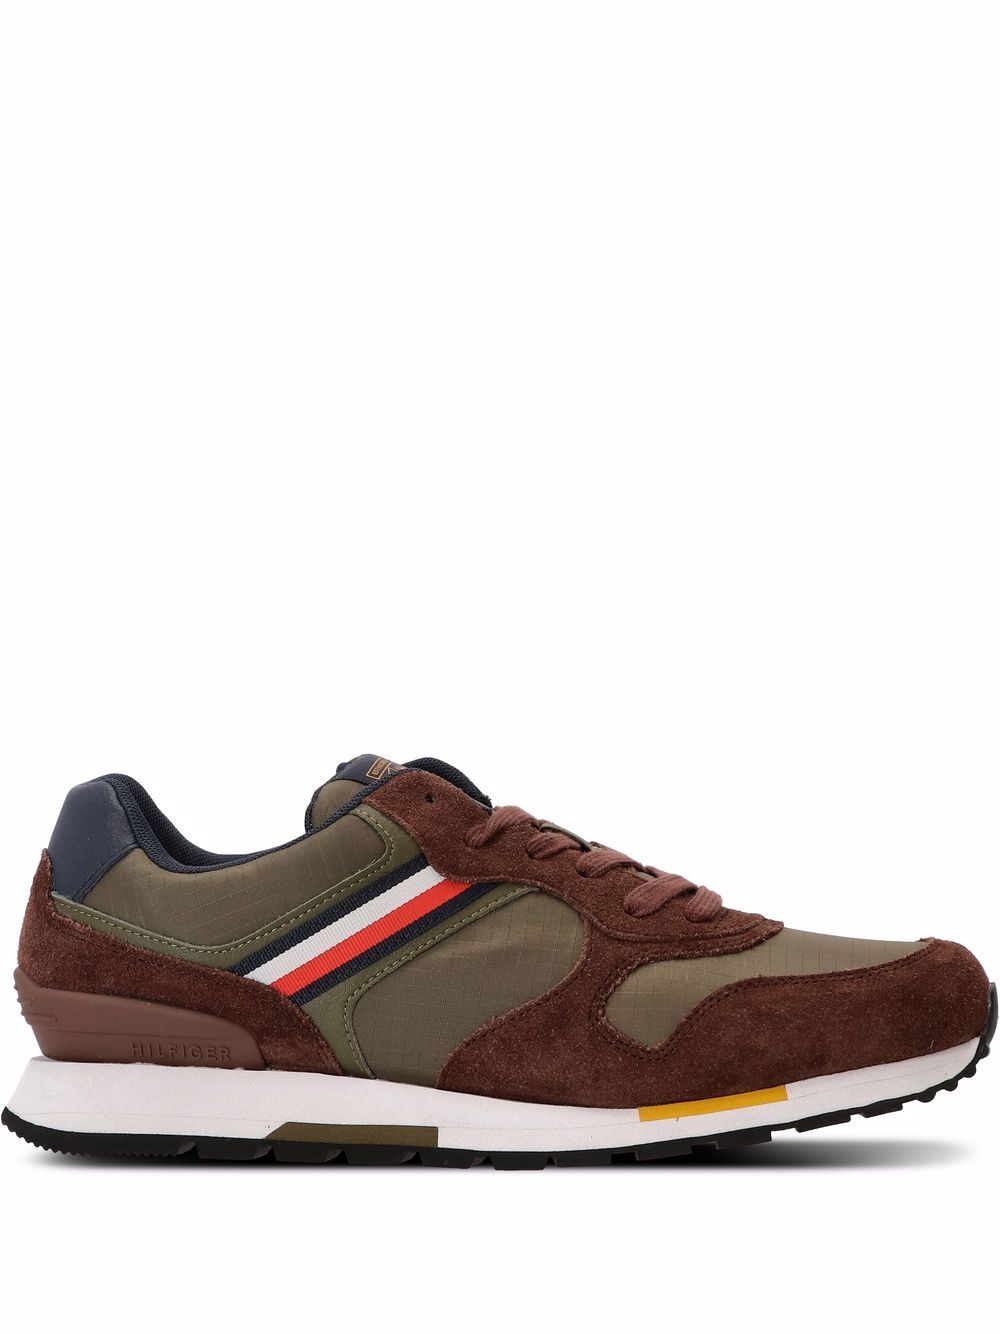 Tommy Hilfiger casual low-top sneakers - Brown von Tommy Hilfiger